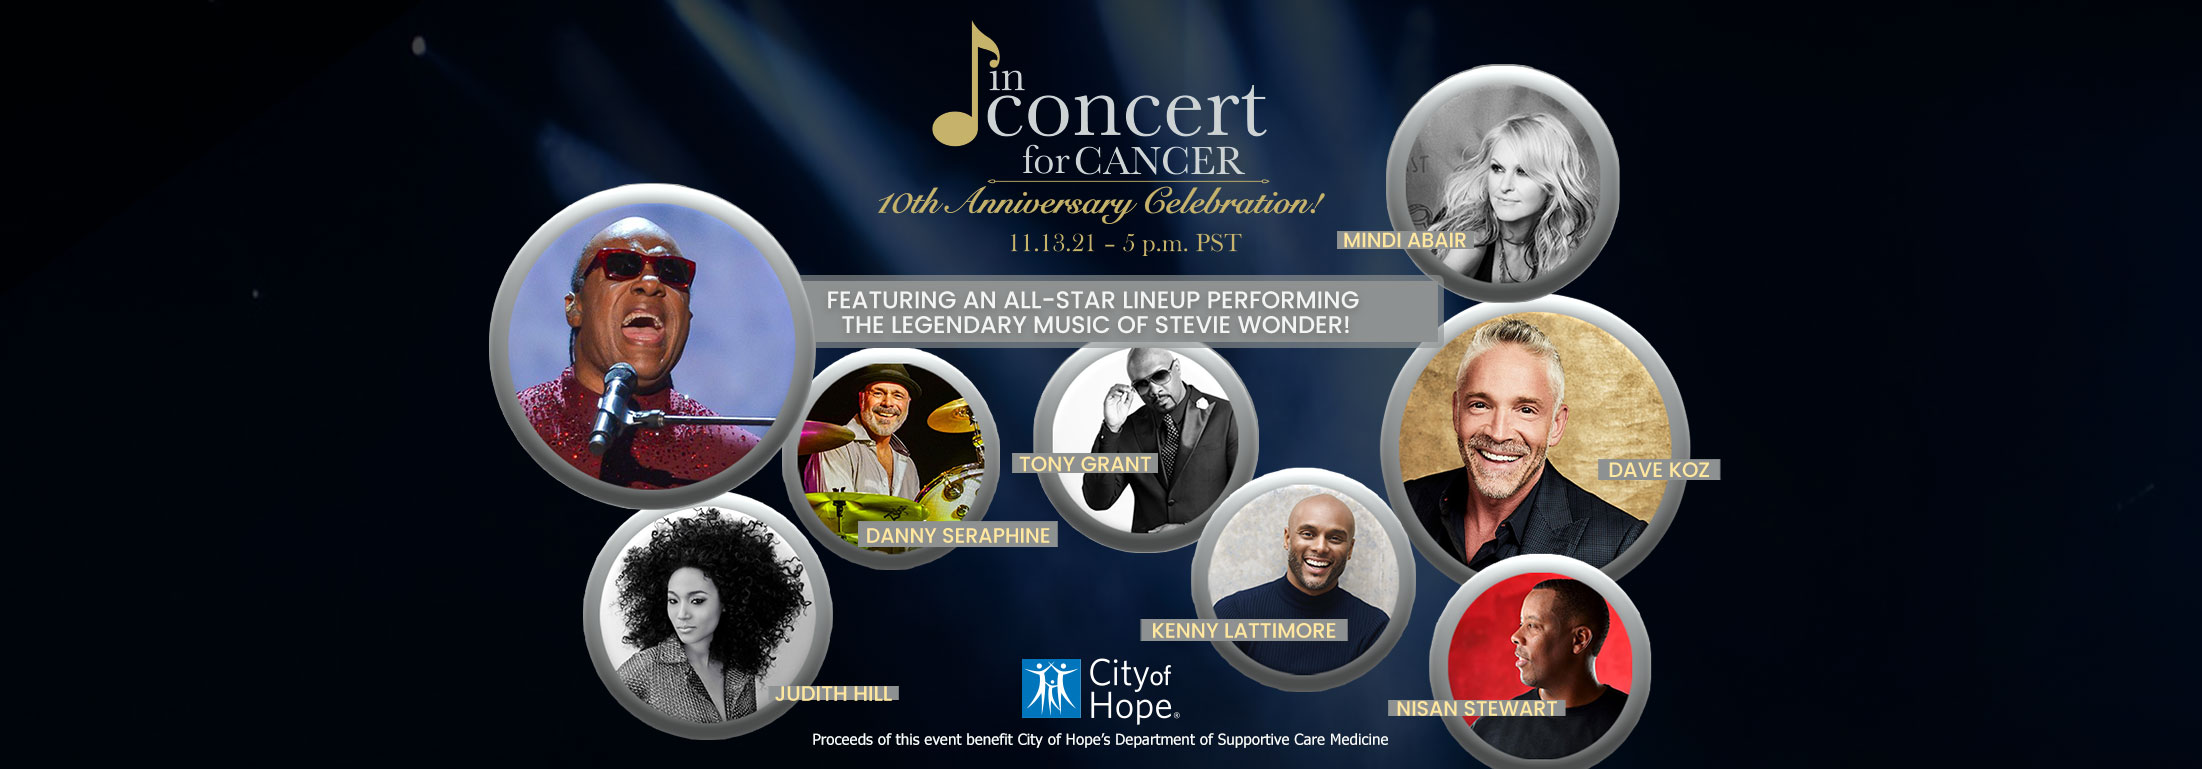 In Concert for Cancer 10th Anniversary Celebration